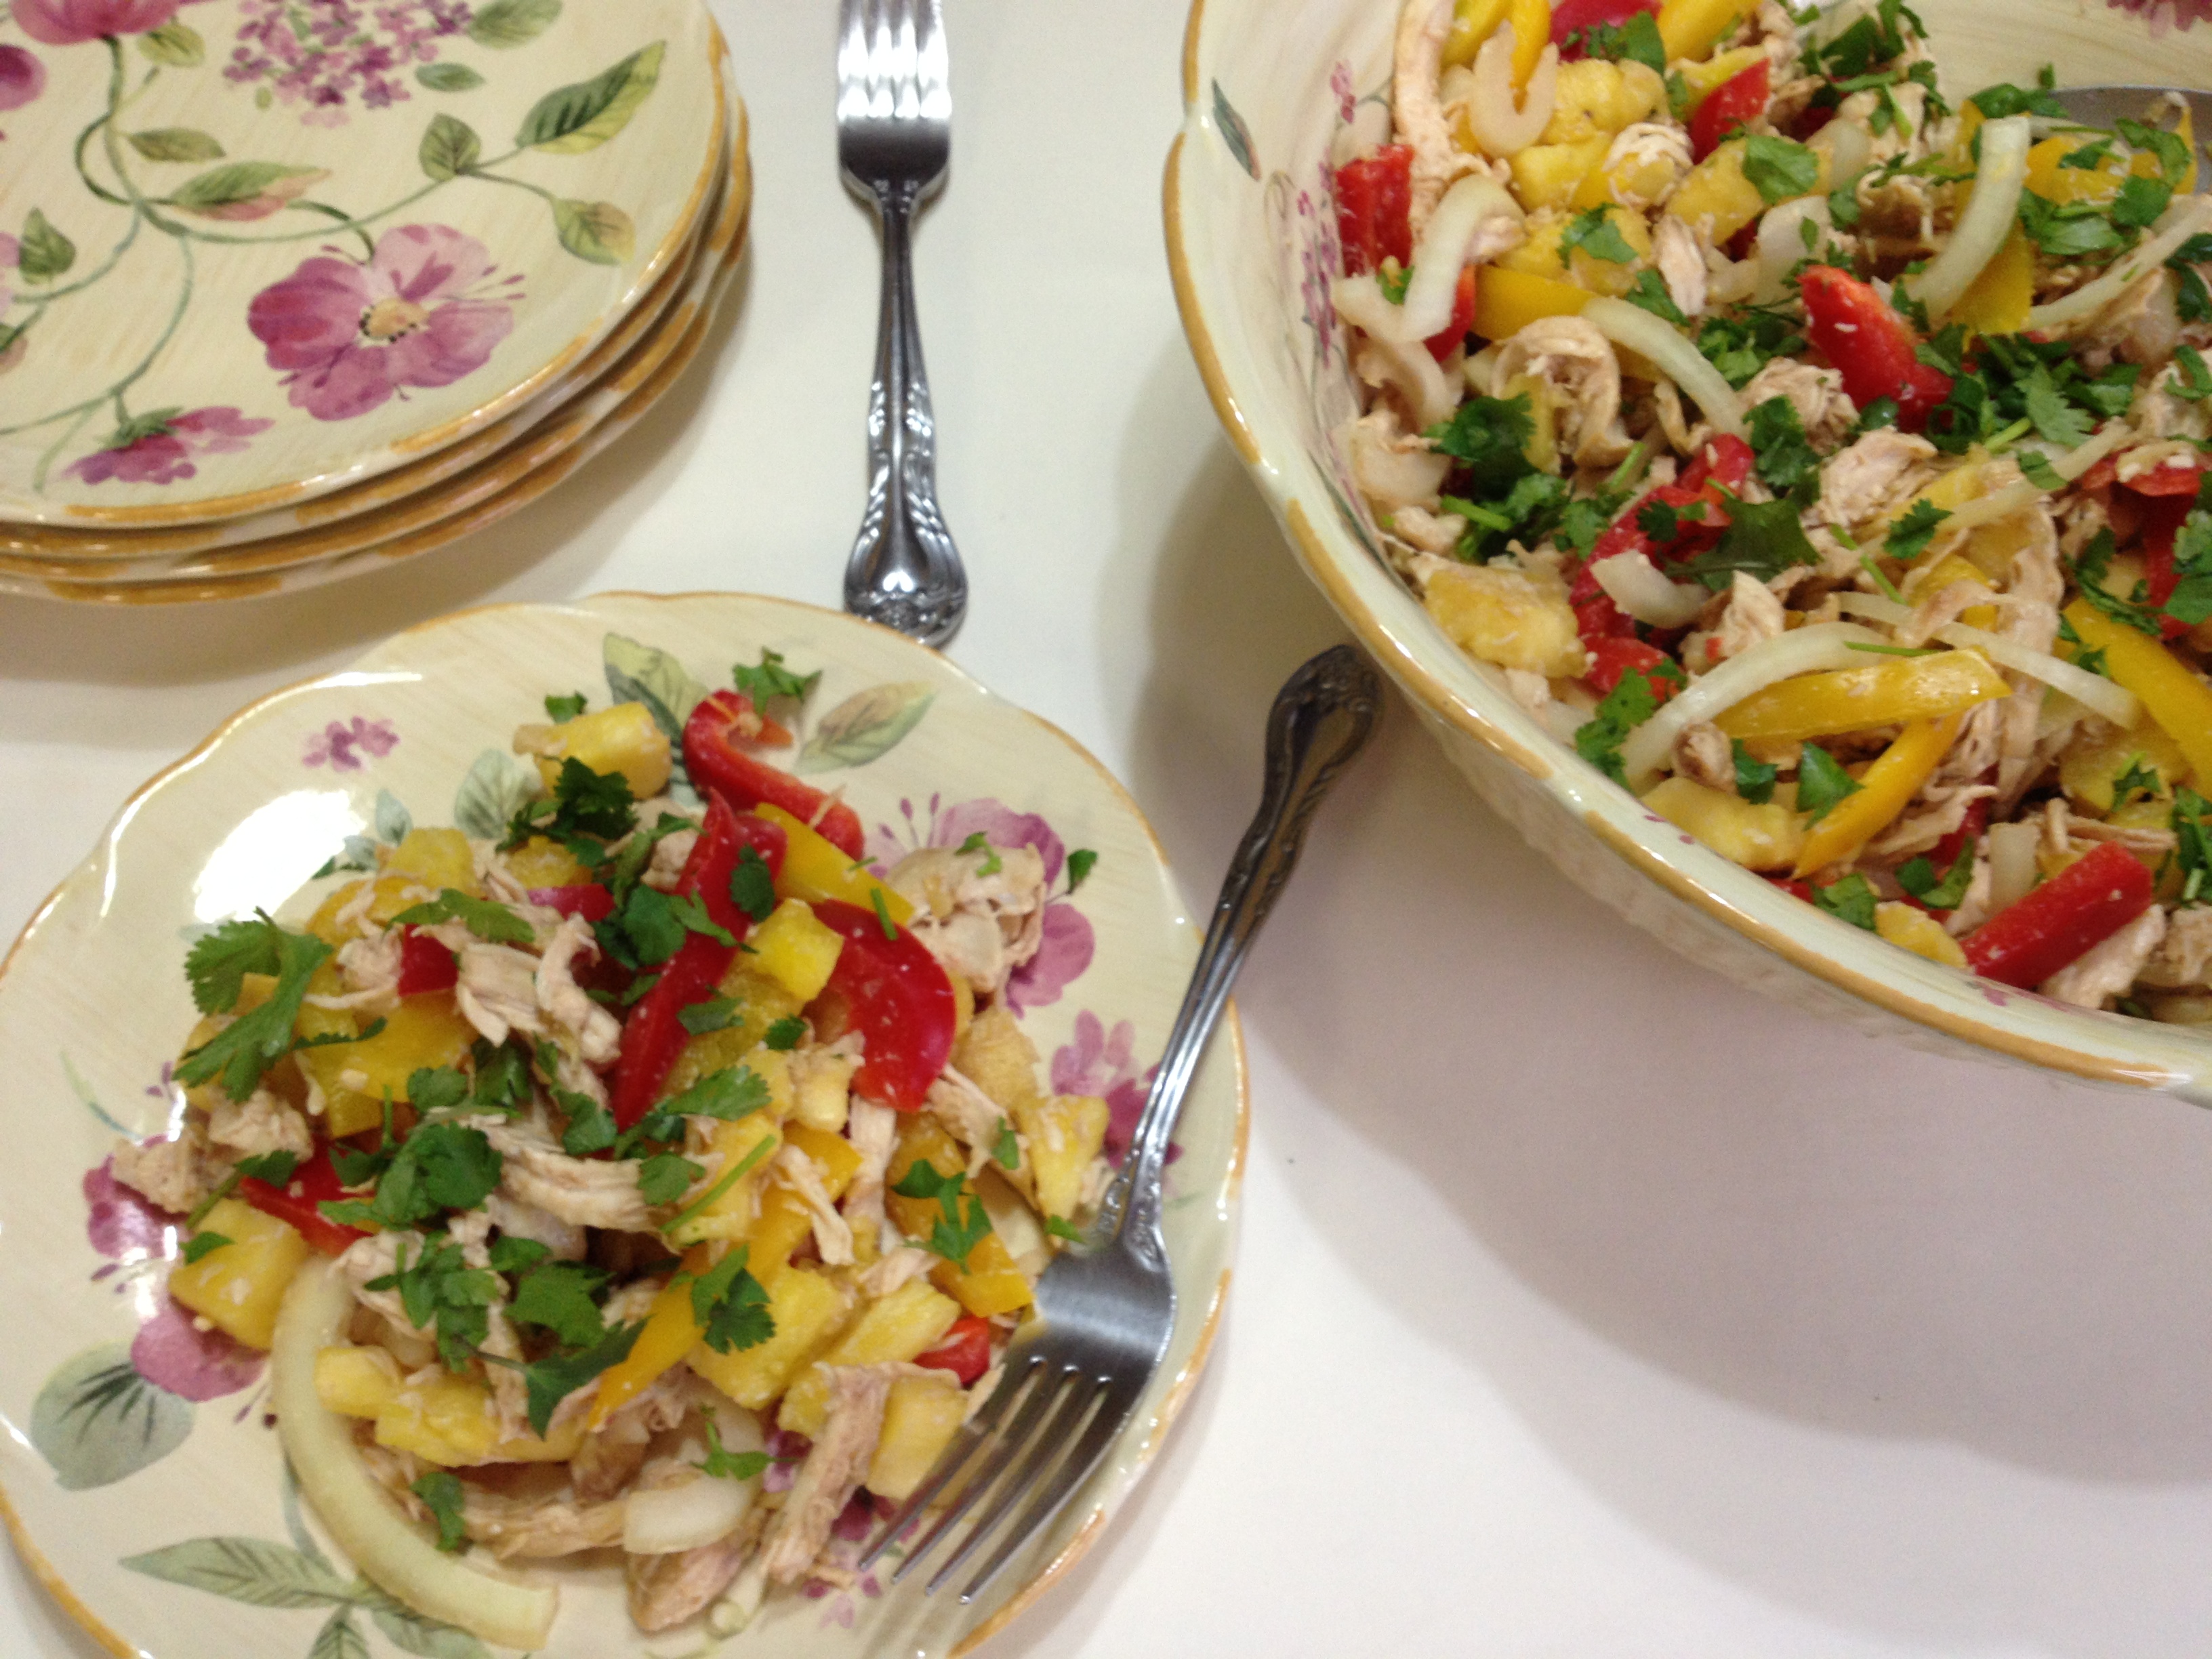 Ginger Chicken and Pineapple Salad